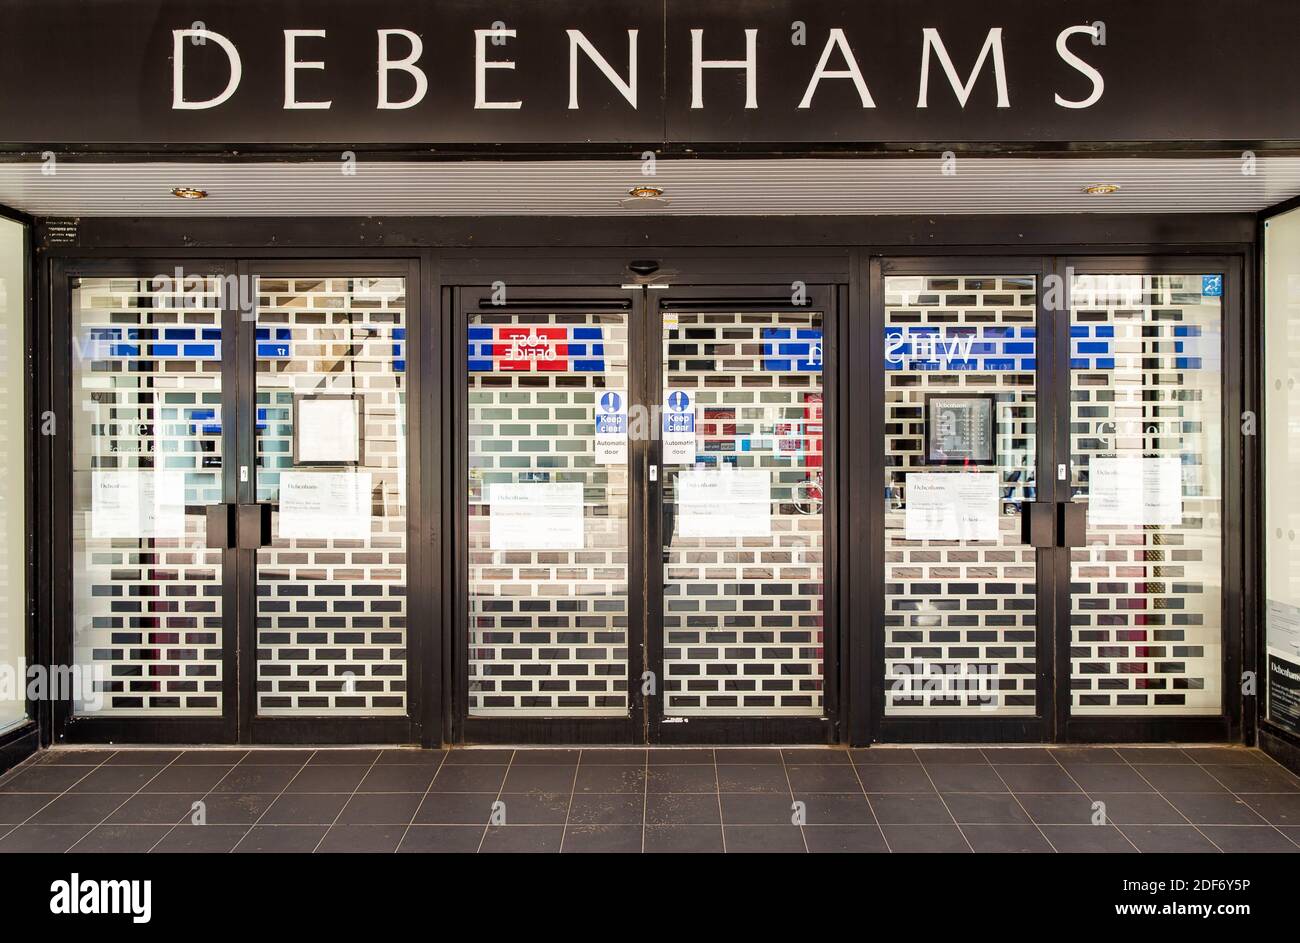 Debenhams in Worthing, currently closed due to Covid-19.  The retailer has announced 22,000 workers jobs are currently at risk.  Debenhams announced today, on April 6, 2020 that it was having to file for administration as a consequence of having to shut all its stores across the UK under the covid-19 coronavirus lockdown. This is to be the second time in a year that the struggling retailer has filed for administration. Its present predicament comes not long after its permanent closure of 22 stores, resulting in more than 700 job losses, with a further 28 already slated for closure in 2021. Bri Stock Photo